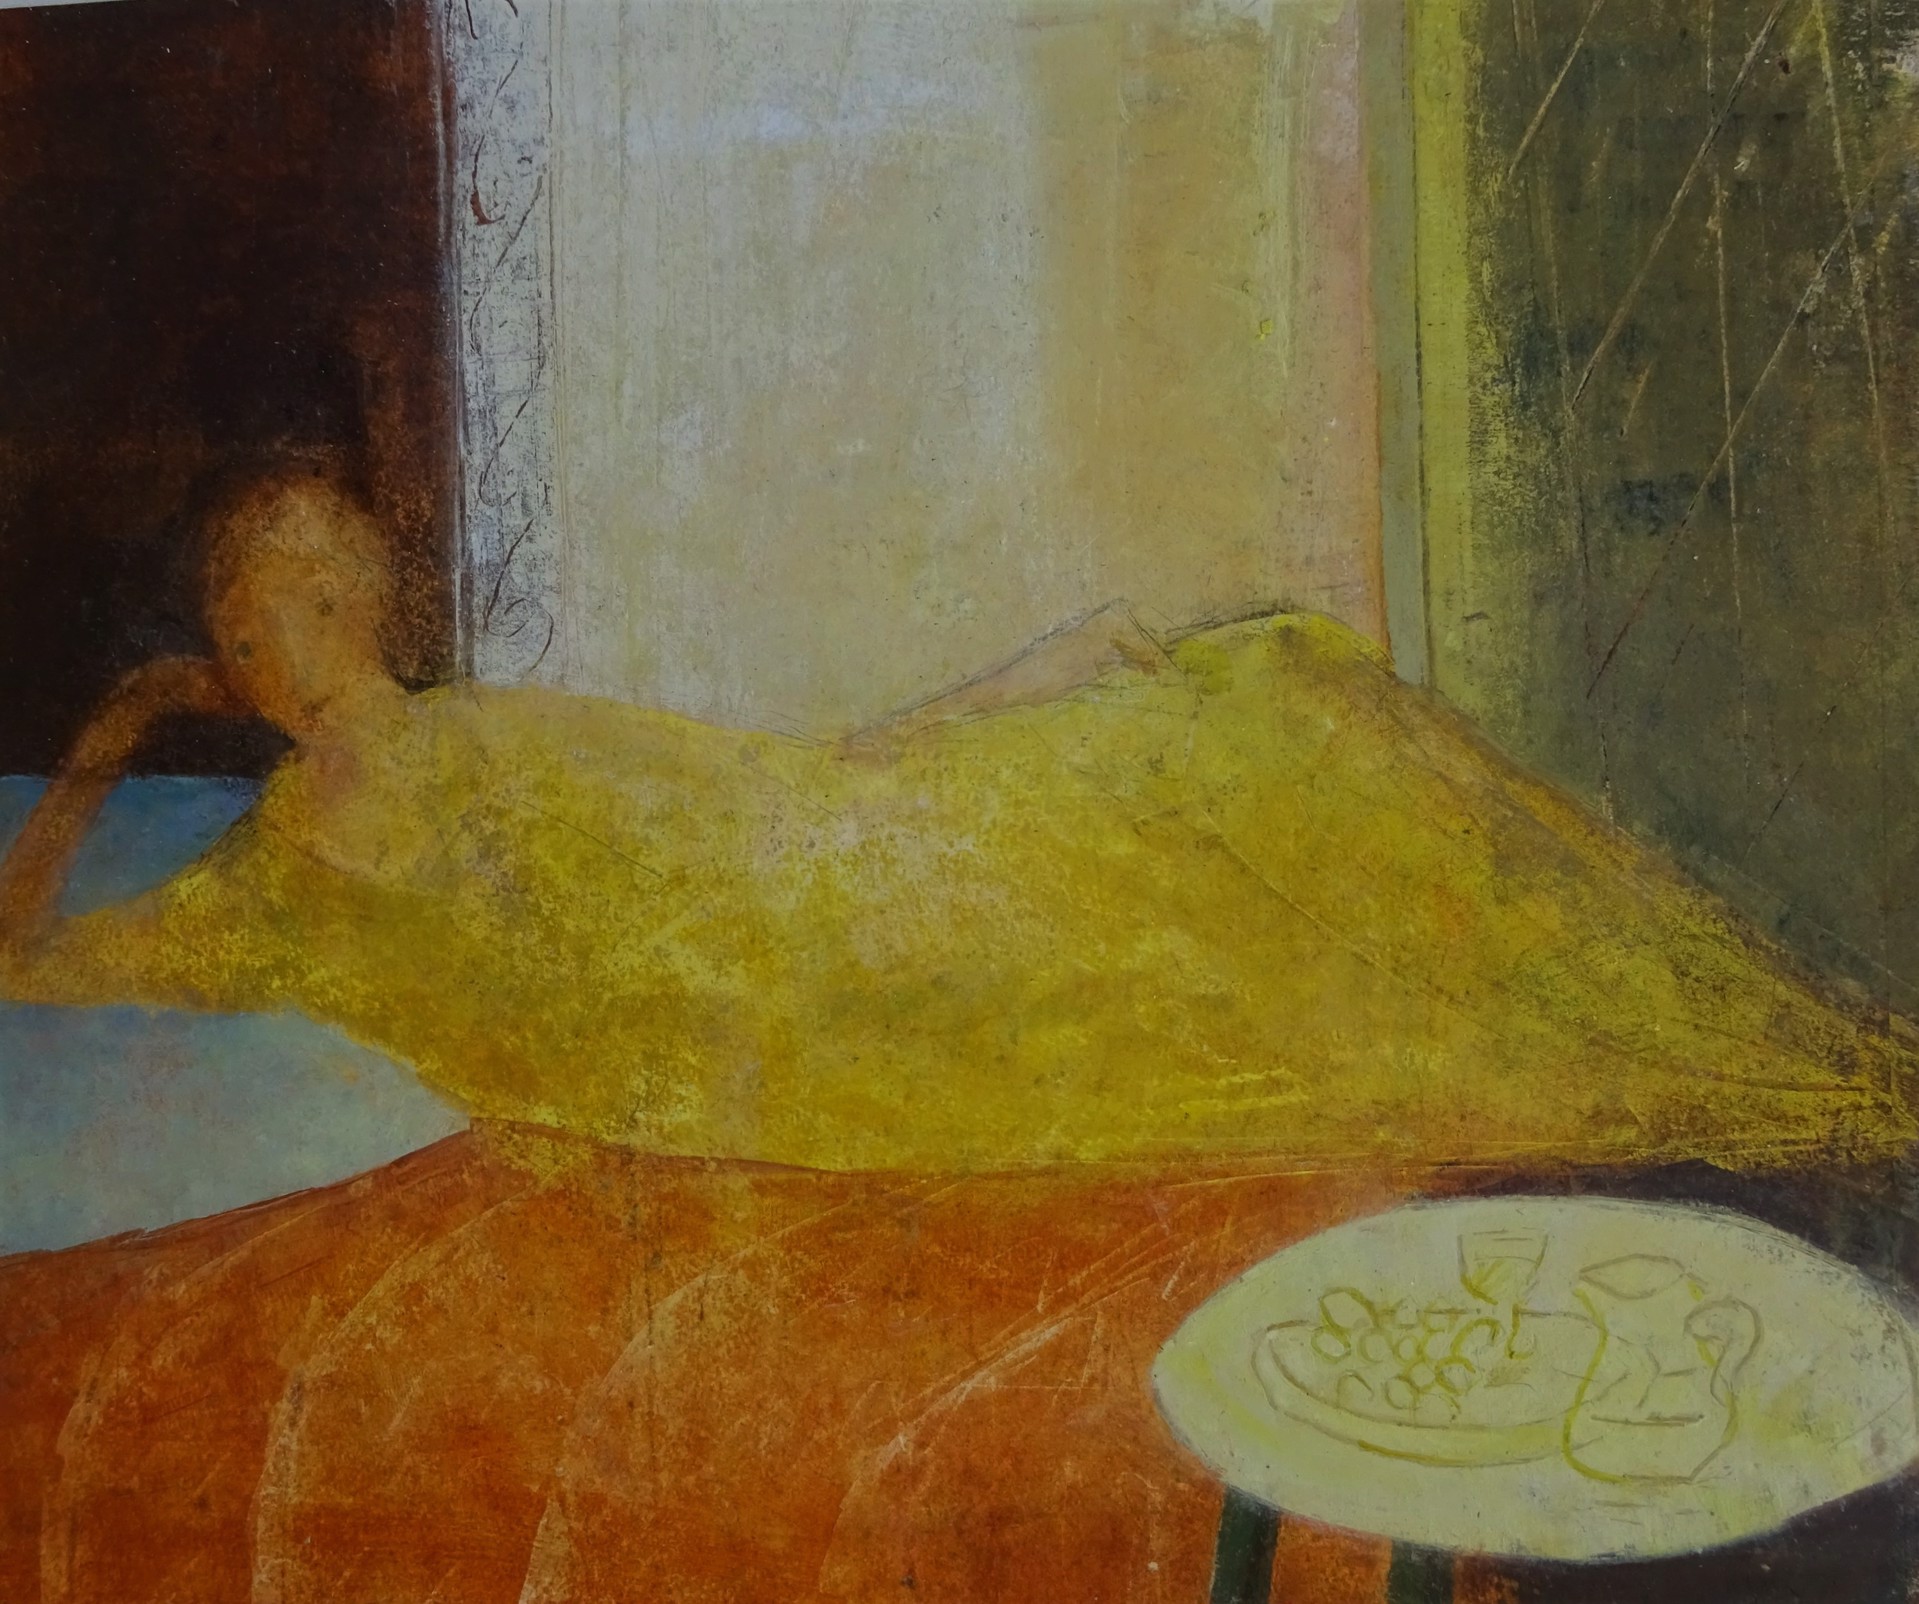 Painting of a female figure in a yellow dress reclining on a bed, with a small table in the foregroundble